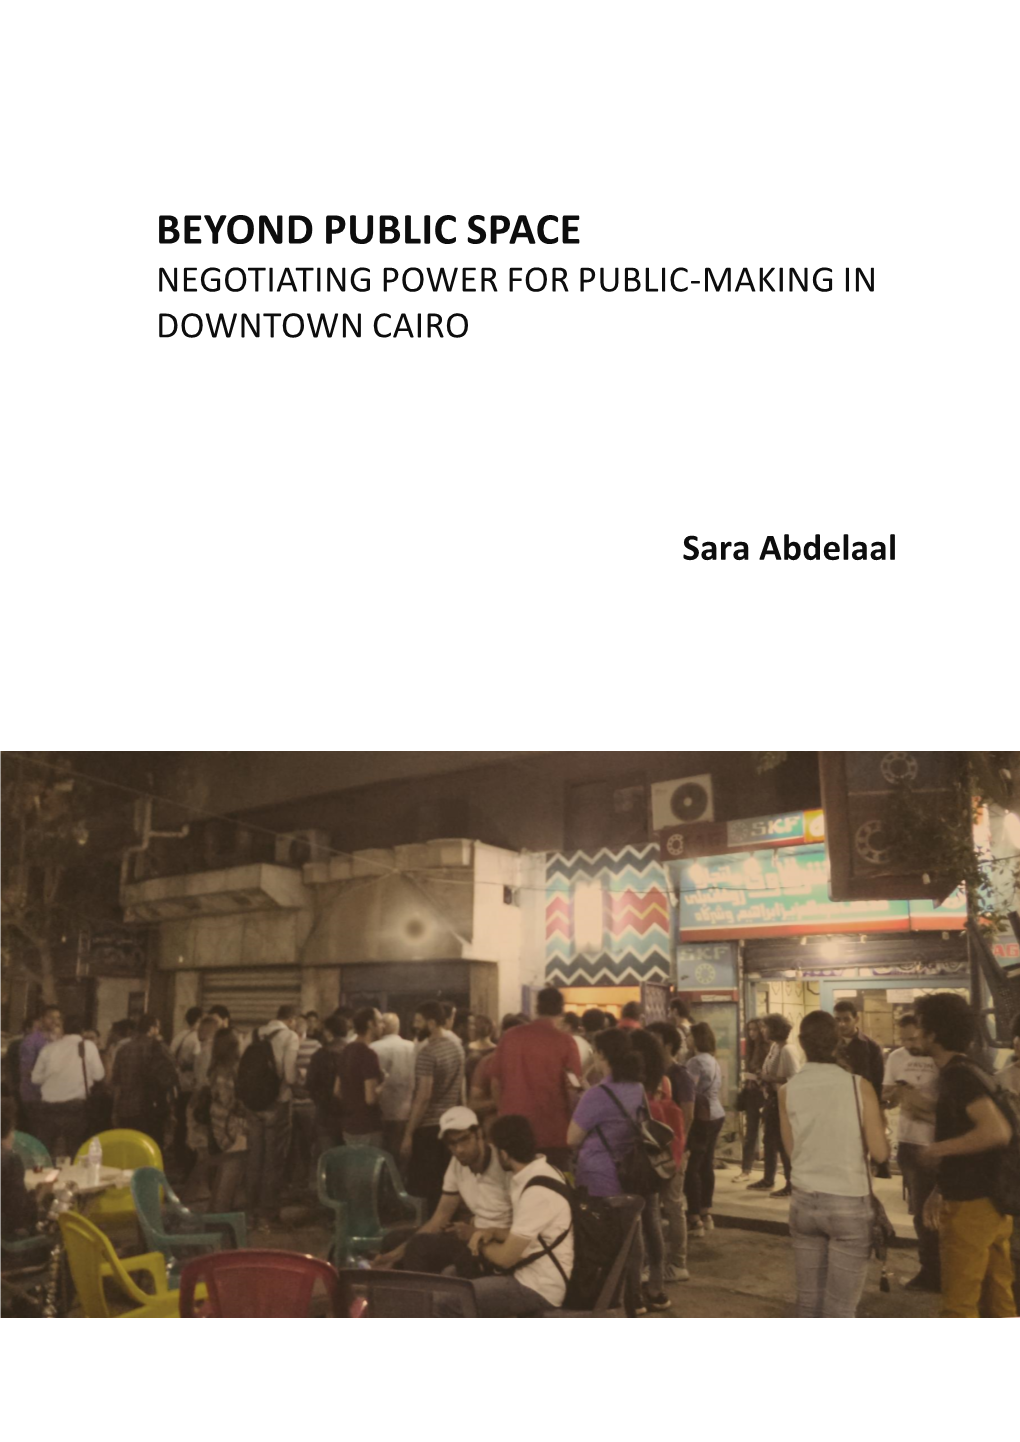 Negotiating Power for Public-Making in Downtown Cairo